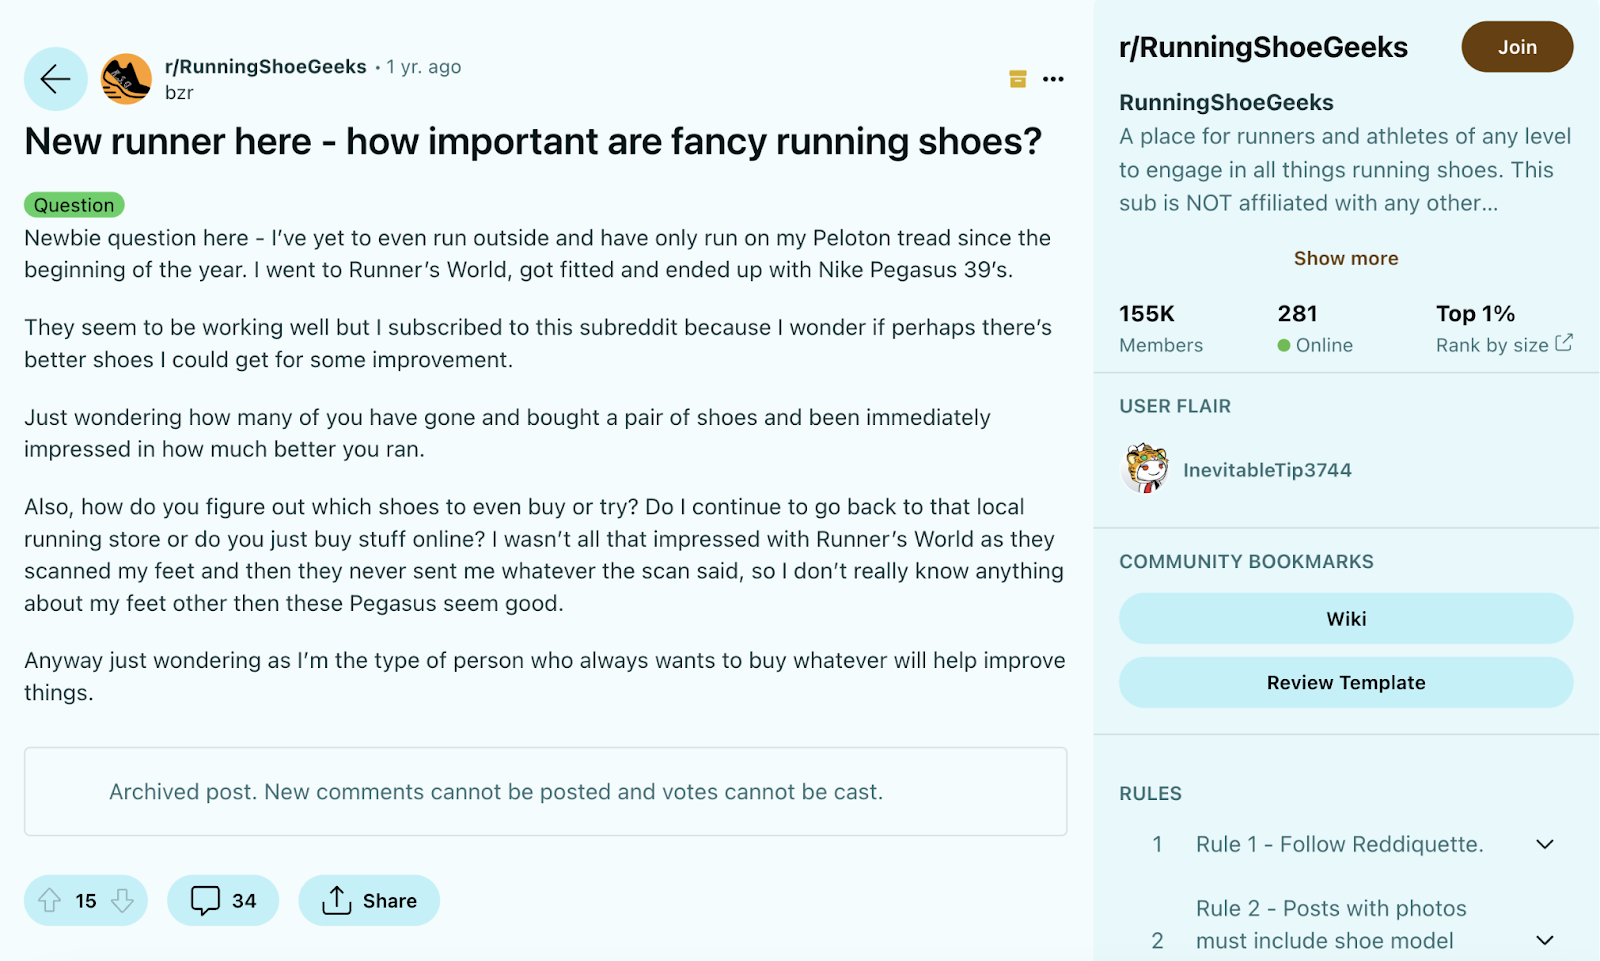 subreddit for running shoe geeks with a thread about the importance of fancy running shoes